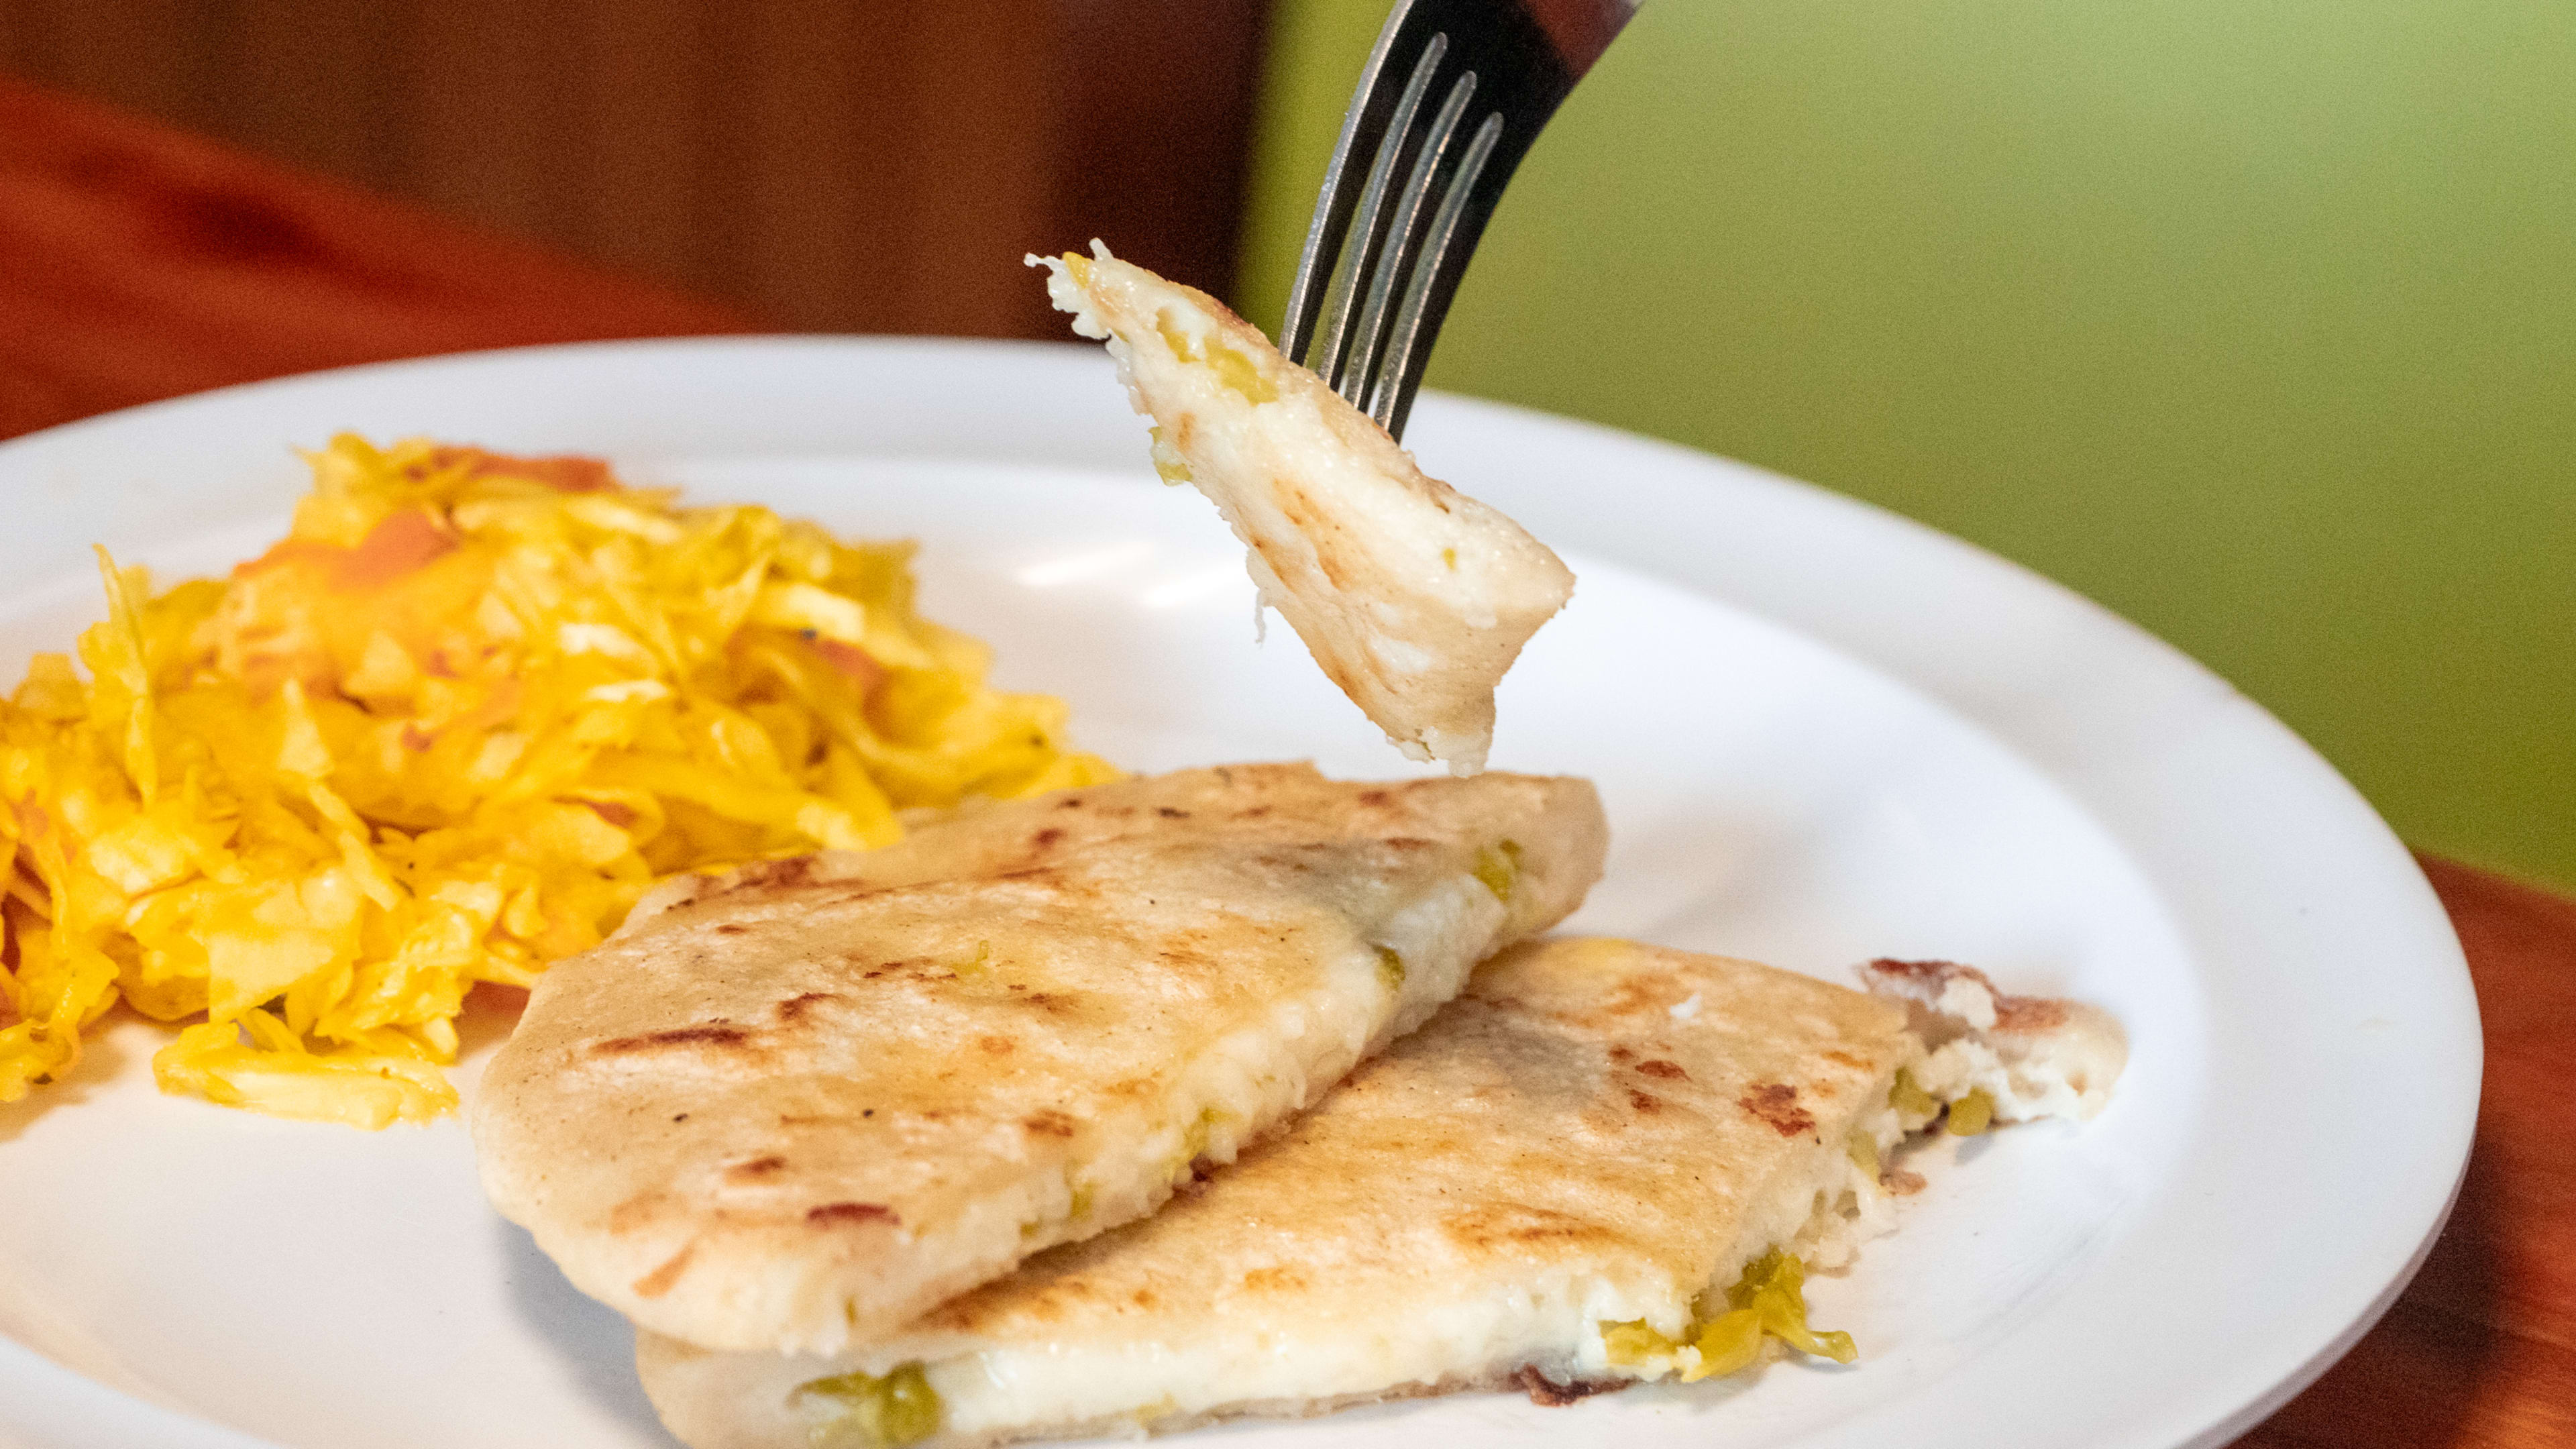 Pupusa with loroco and cheese and a side of yellow cabbage